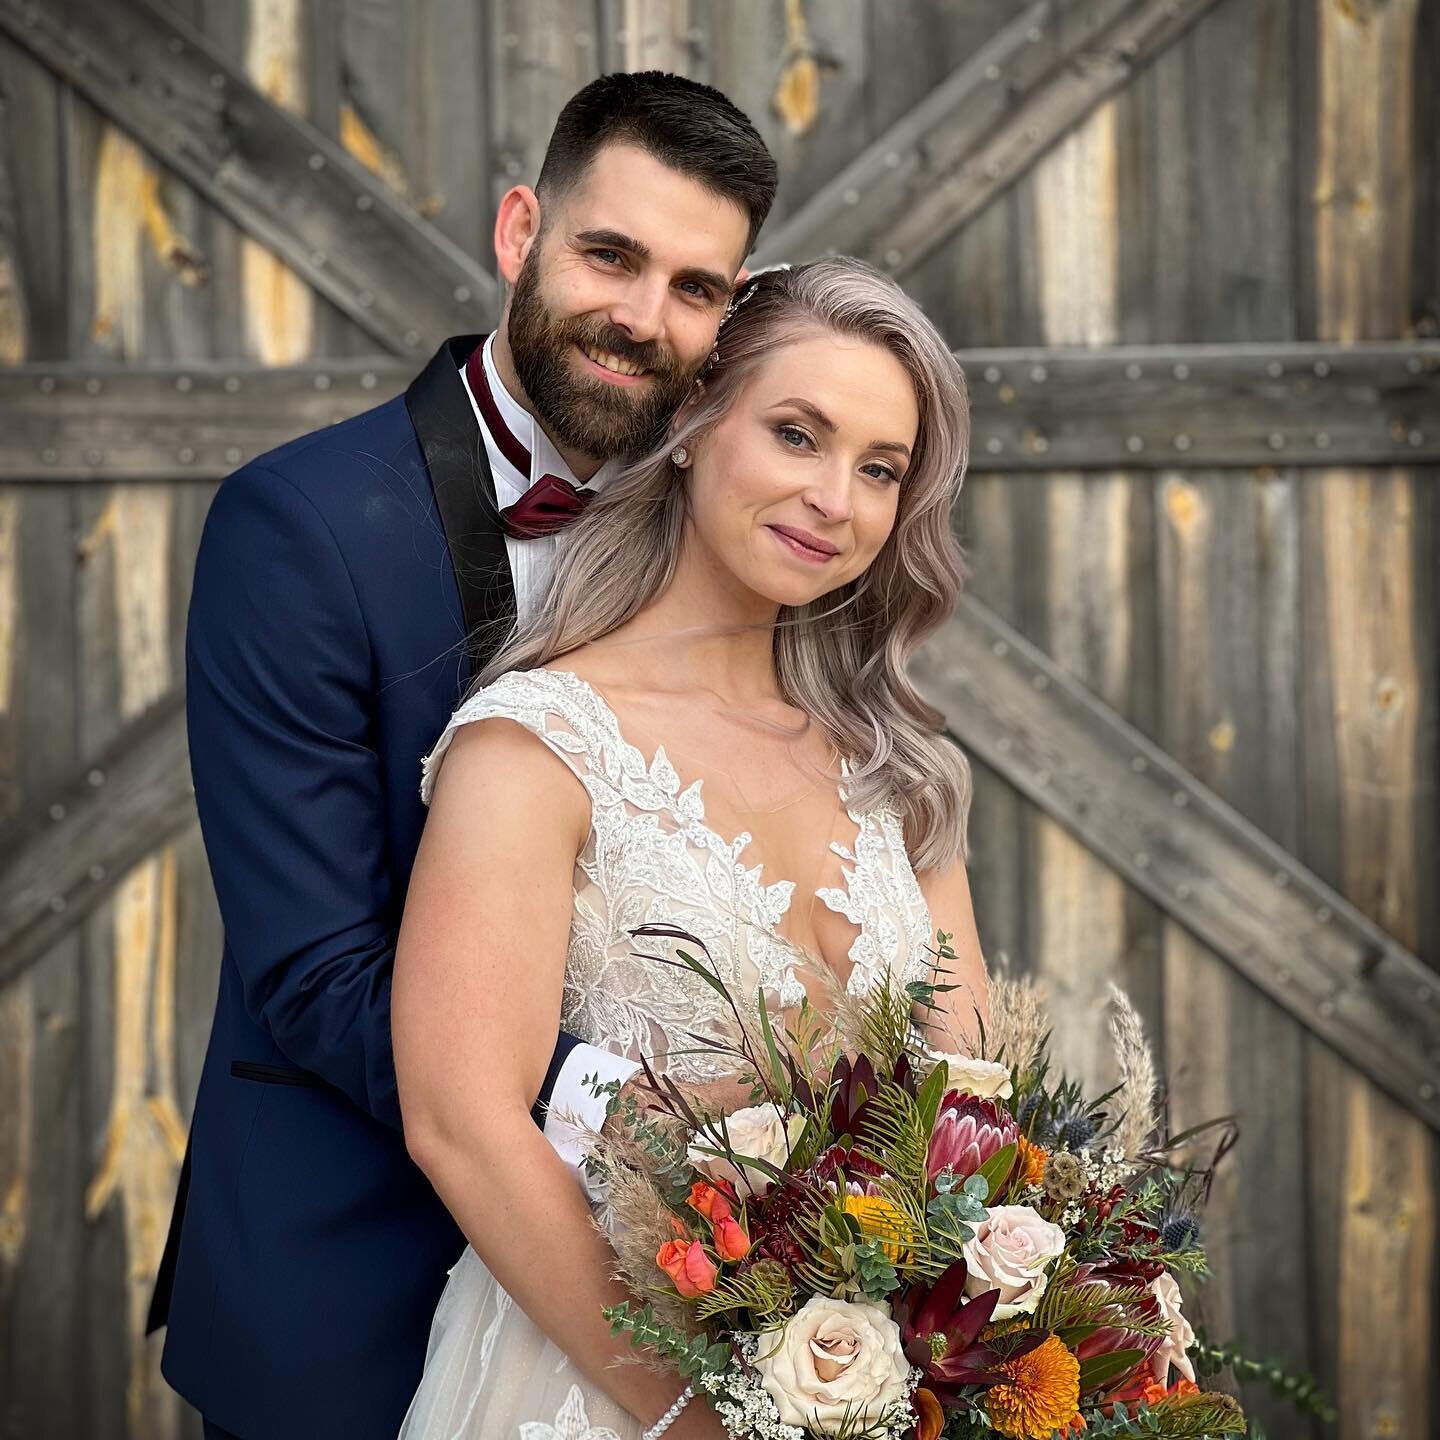 SNEAK PEEK! Congratulations to Stephanie and Ty Williams! It was an honor to photo and film your wedding day. We can&rsquo;t wait to tell your story so you can relive it all over again. We love you both! 🧡🥰
*
*
#weddingseason2021 #weddingday #repos